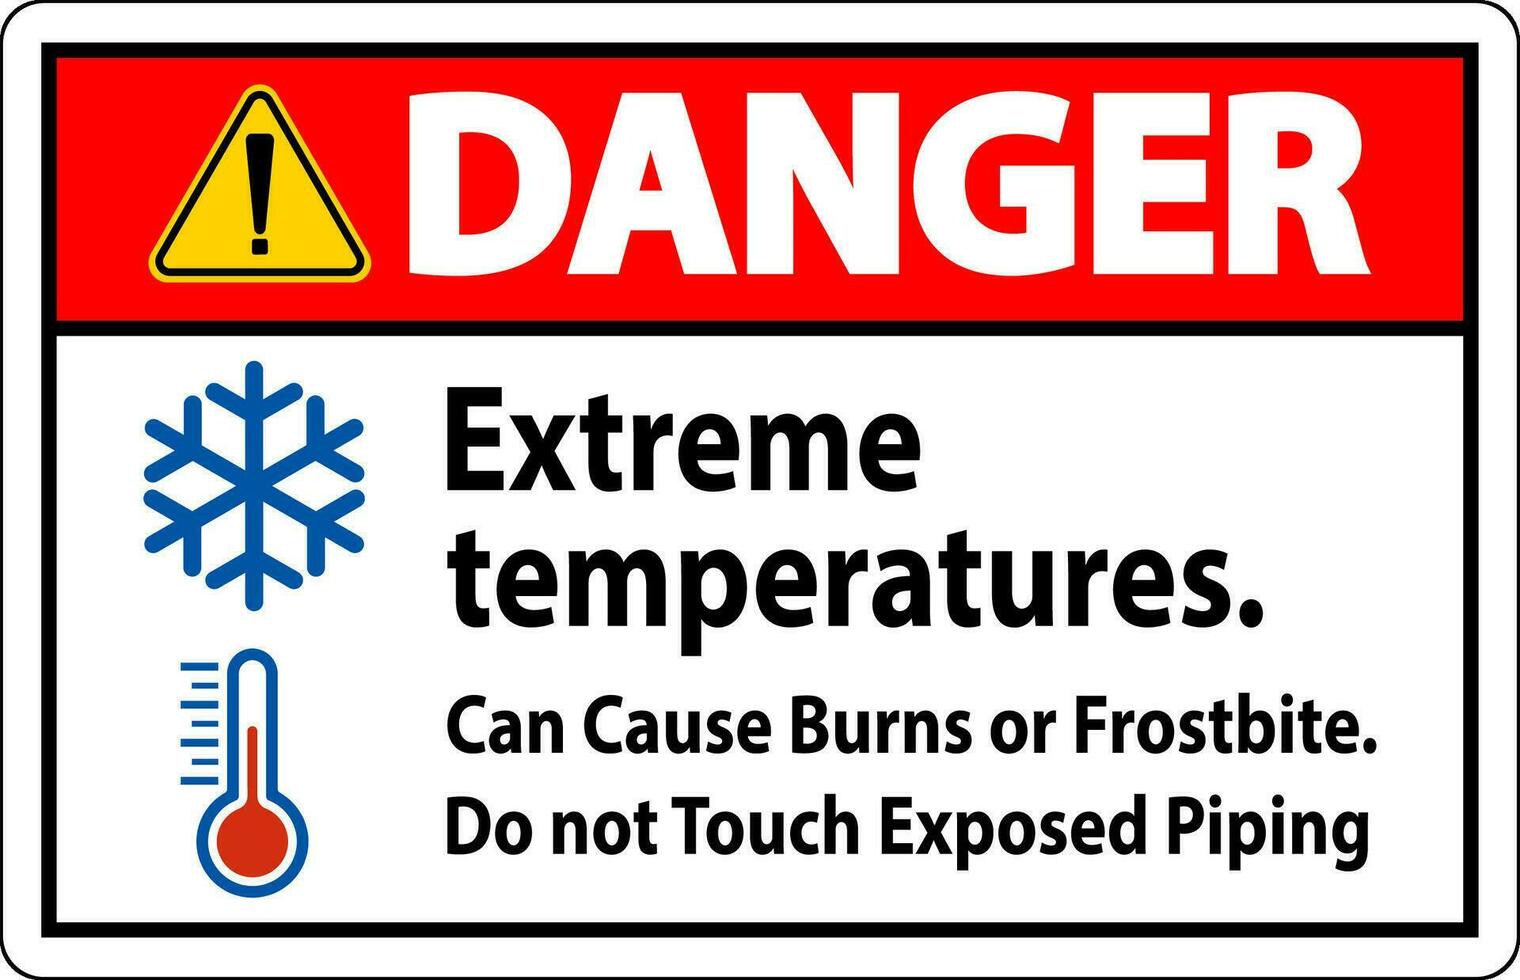 Danger Sign Extreme Temperatures, Can Cause Burns or Frostbite, Do not Touch Exposed Piping vector